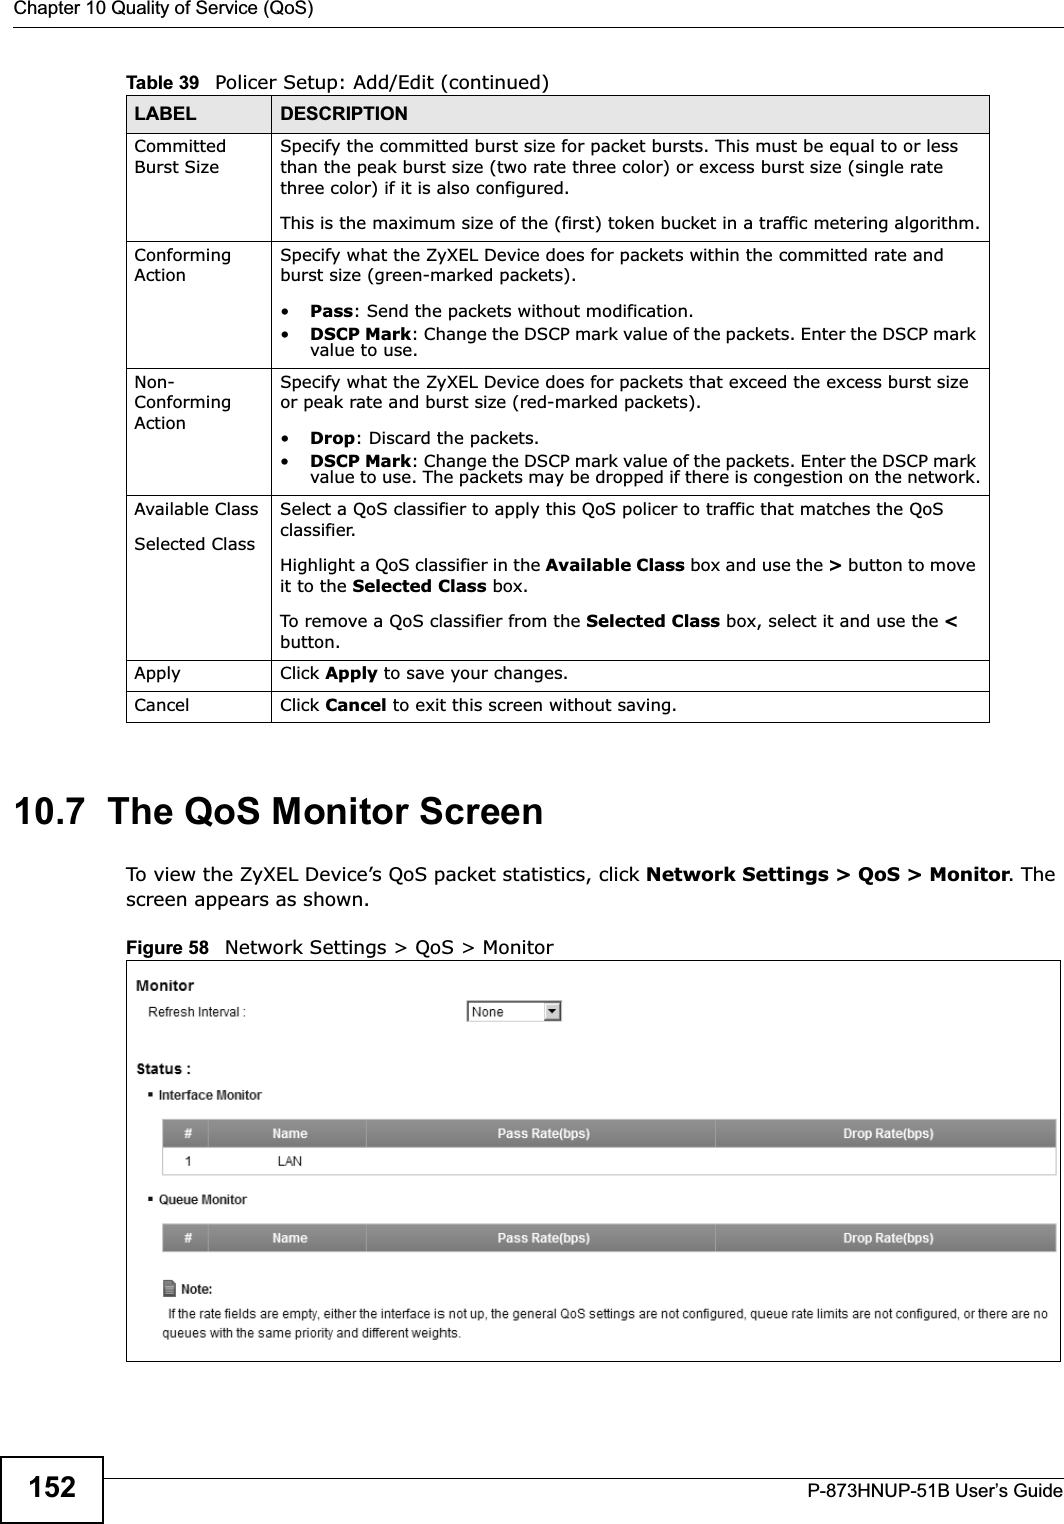 Chapter 10 Quality of Service (QoS)P-873HNUP-51B User’s Guide15210.7  The QoS Monitor Screen To view the ZyXEL Device’s QoS packet statistics, click Network Settings &gt; QoS &gt; Monitor. The screen appears as shown. Figure 58   Network Settings &gt; QoS &gt; Monitor Committed Burst SizeSpecify the committed burst size for packet bursts. This must be equal to or less than the peak burst size (two rate three color) or excess burst size (single rate three color) if it is also configured.This is the maximum size of the (first) token bucket in a traffic metering algorithm.Conforming ActionSpecify what the ZyXEL Device does for packets within the committed rate and burst size (green-marked packets). •Pass: Send the packets without modification.•DSCP Mark: Change the DSCP mark value of the packets. Enter the DSCP mark value to use. Non-Conforming ActionSpecify what the ZyXEL Device does for packets that exceed the excess burst size or peak rate and burst size (red-marked packets). •Drop: Discard the packets.•DSCP Mark: Change the DSCP mark value of the packets. Enter the DSCP mark value to use. The packets may be dropped if there is congestion on the network.Available ClassSelected Class Select a QoS classifier to apply this QoS policer to traffic that matches the QoS classifier.Highlight a QoS classifier in the Available Class box and use the &gt; button to move it to the Selected Class box.To remove a QoS classifier from the Selected Class box, select it and use the &lt;button.Apply Click Apply to save your changes.Cancel Click Cancel to exit this screen without saving.Table 39   Policer Setup: Add/Edit (continued)LABEL DESCRIPTION